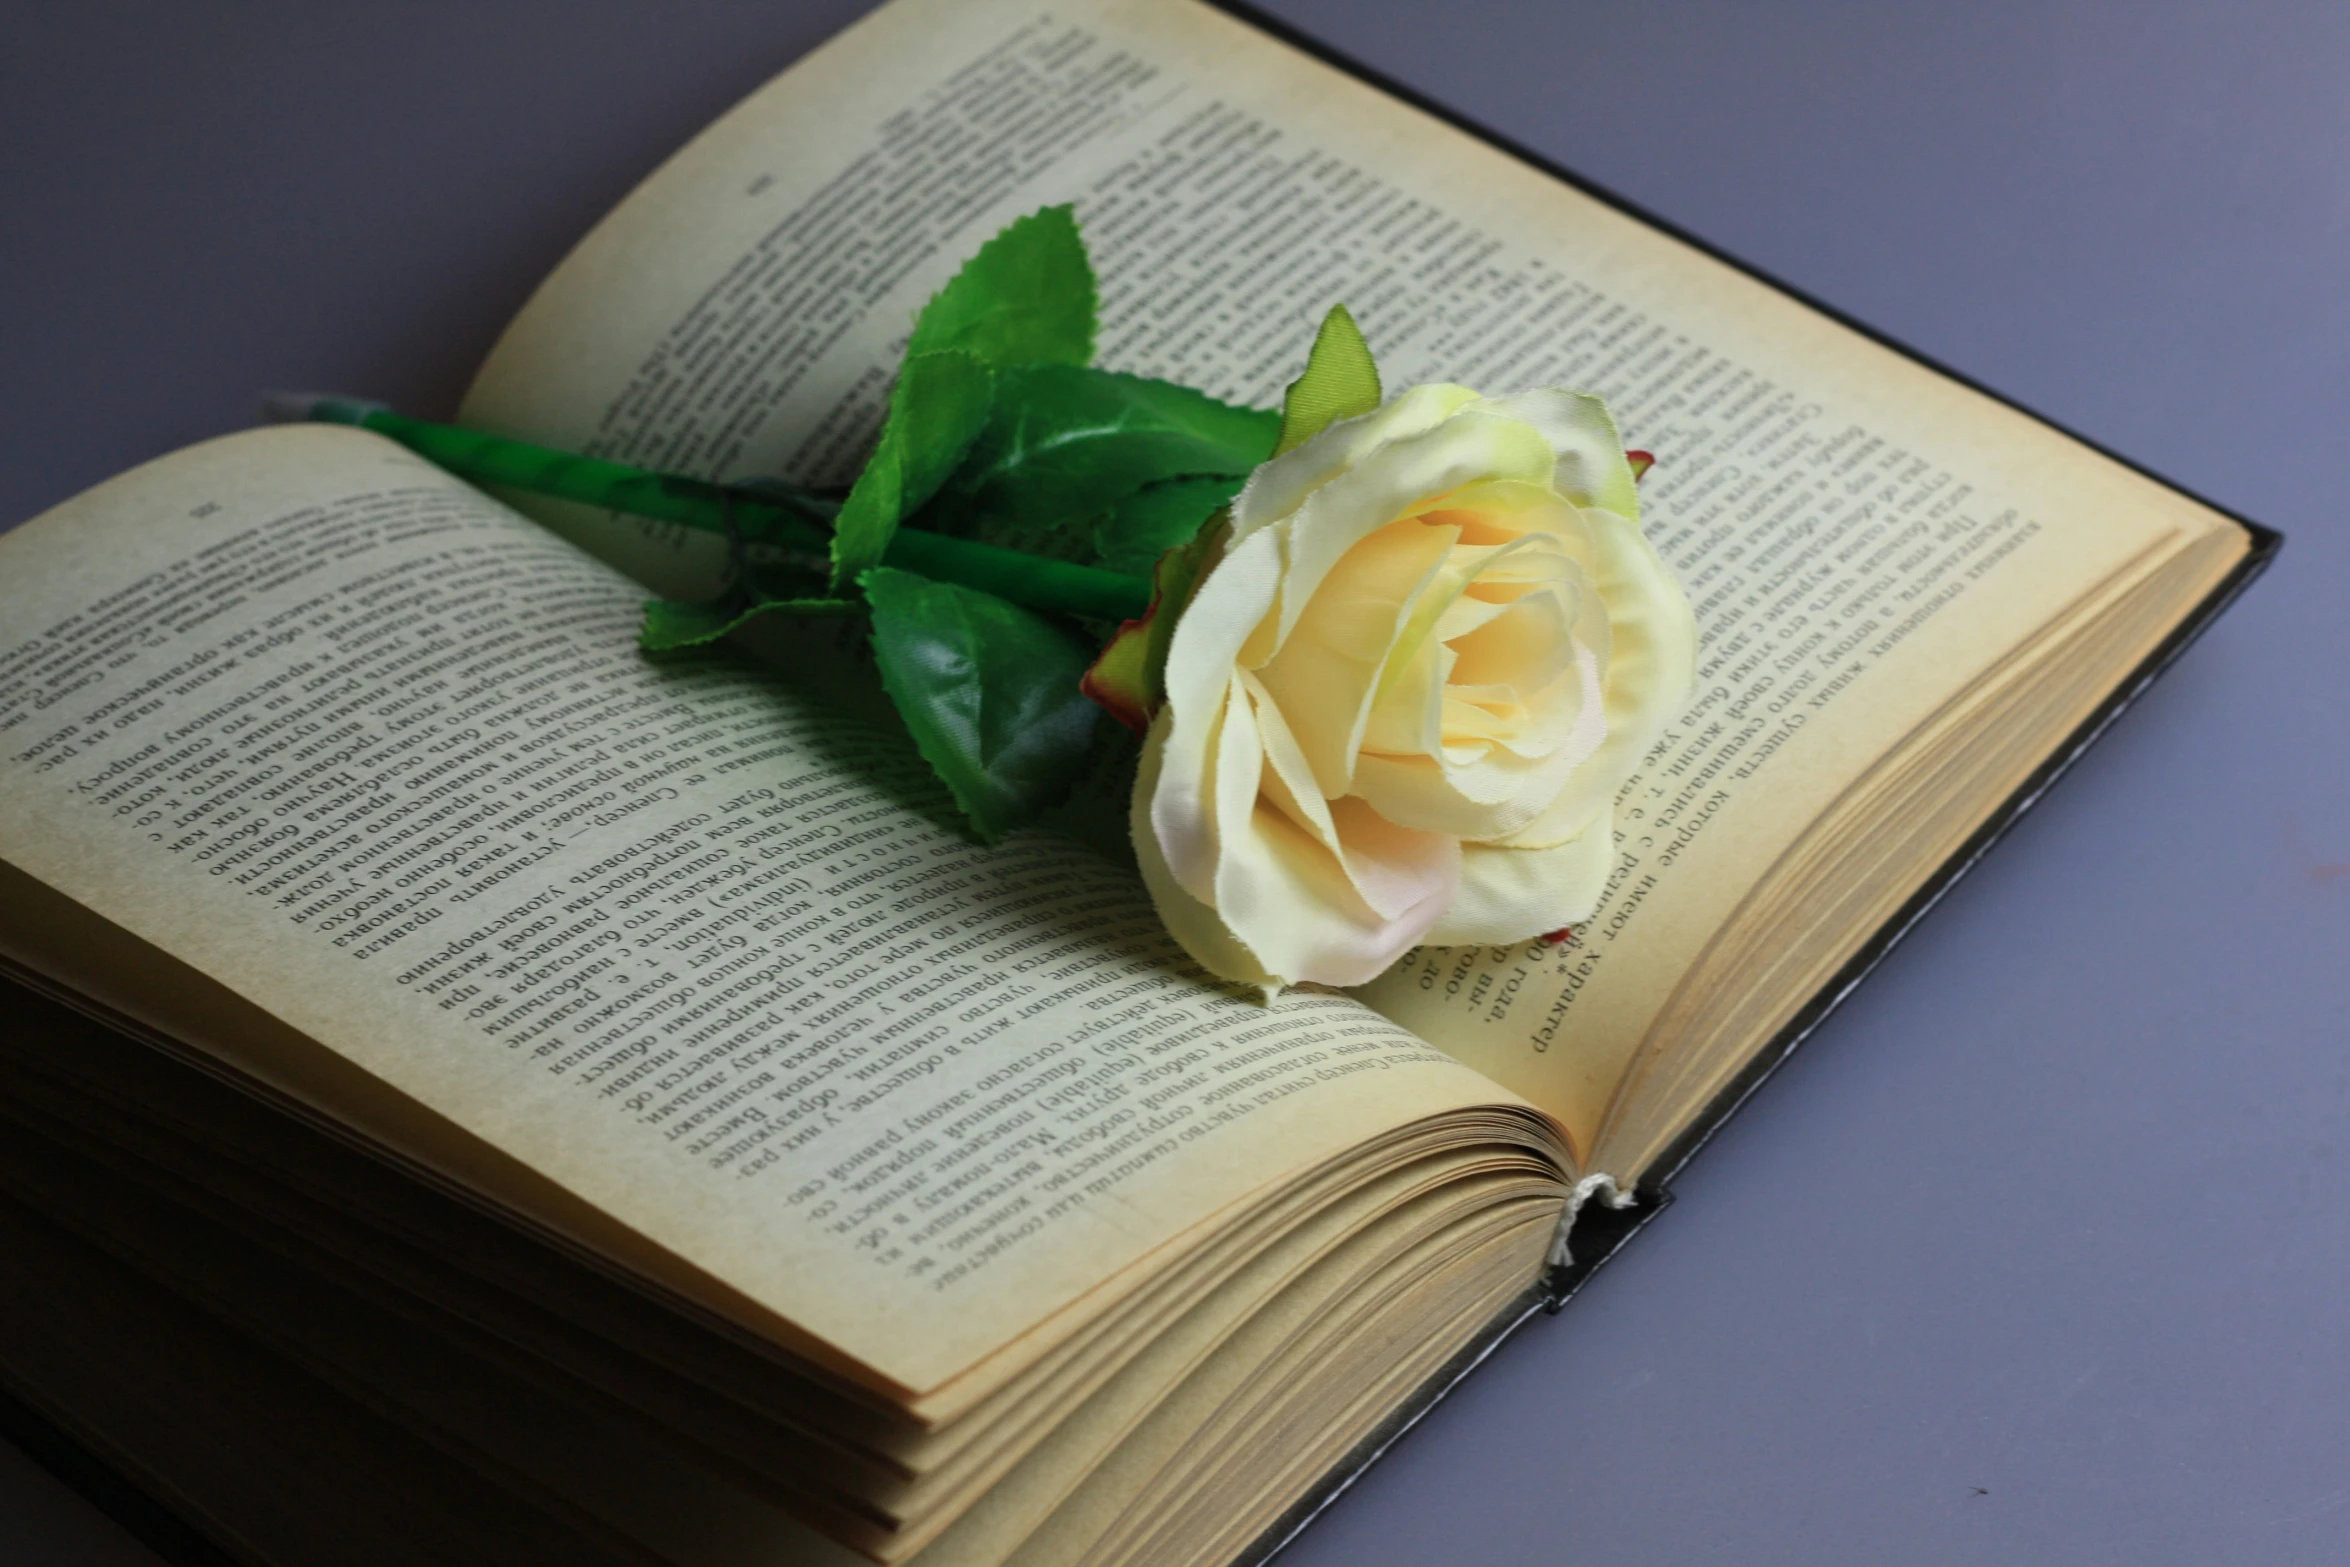 a white rose lying on top of an open book